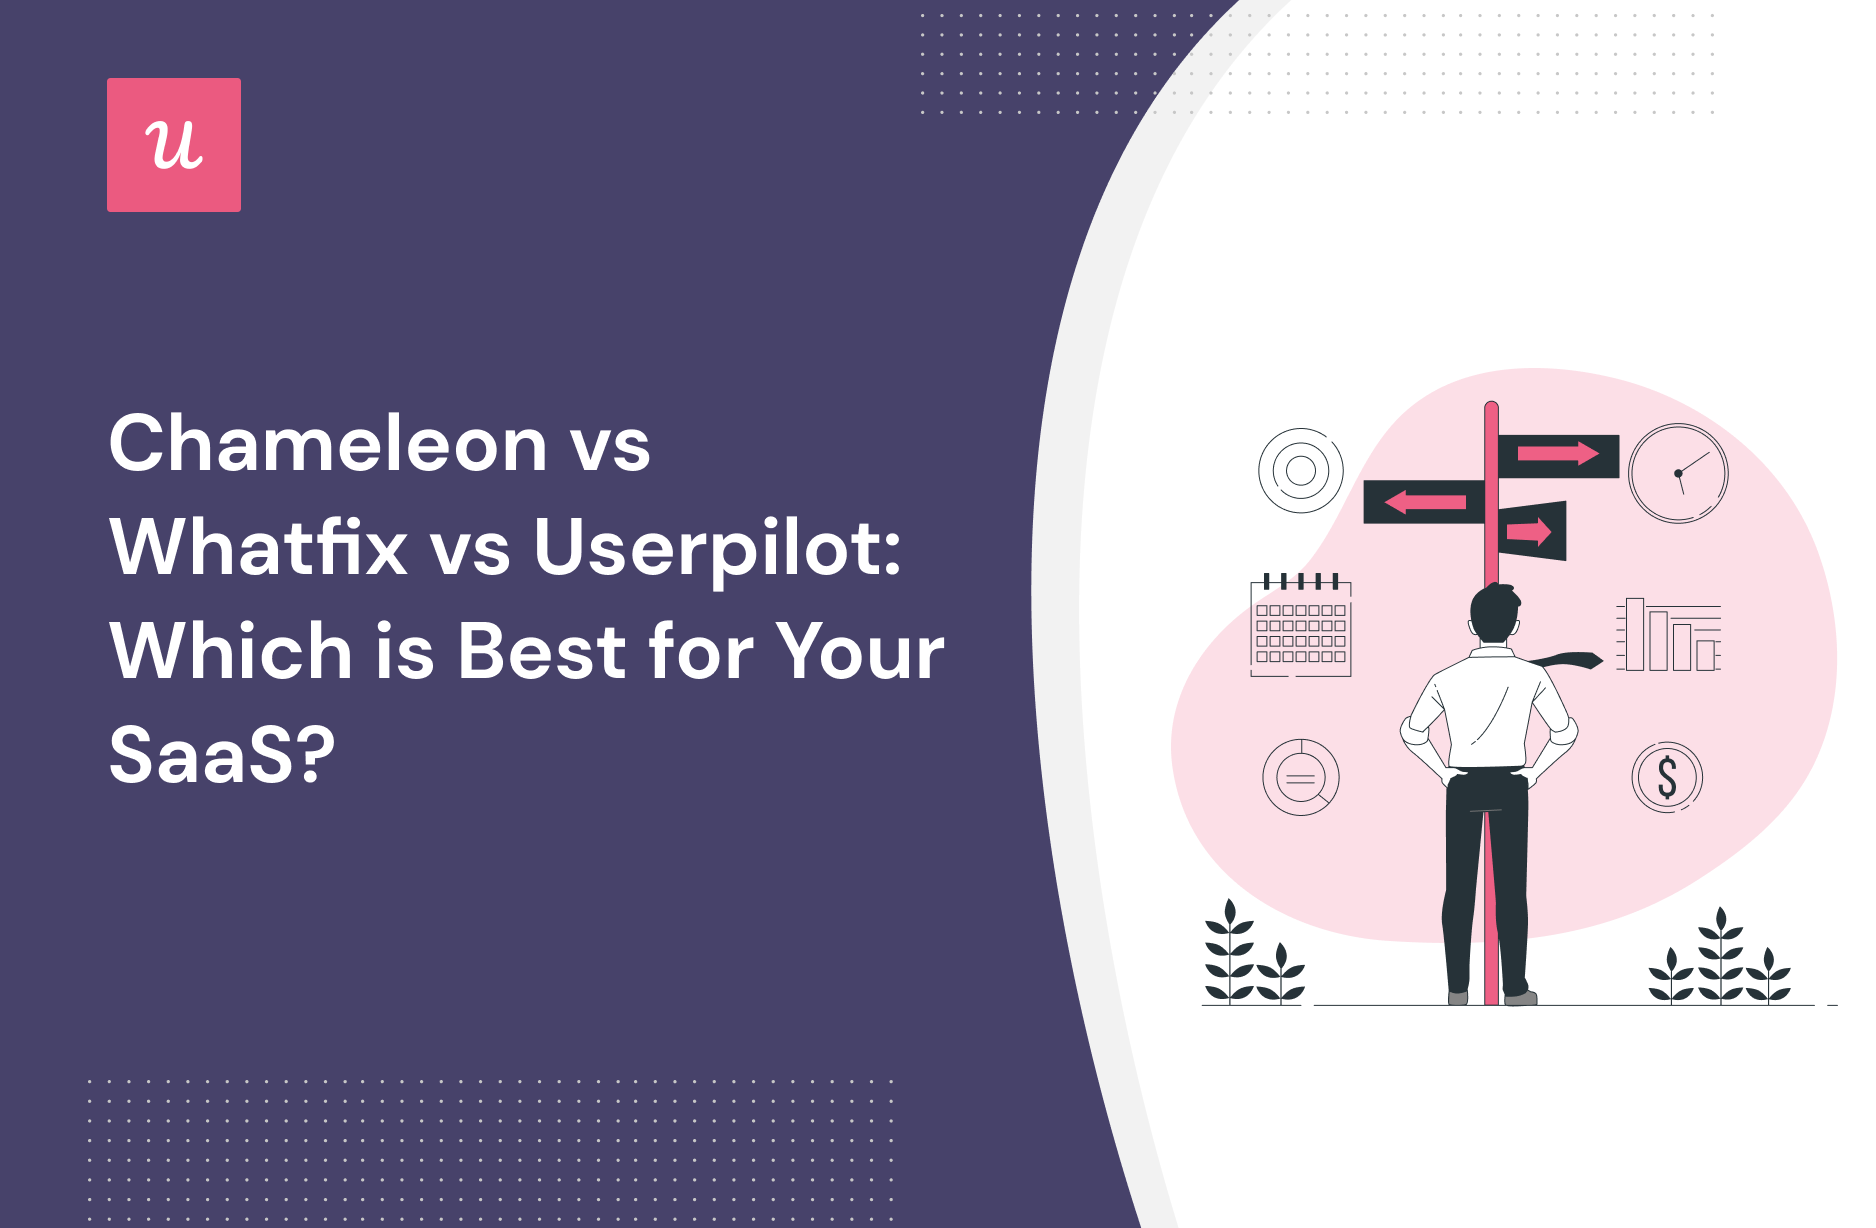 Chameleon vs Whatfix vs Userpilot: Which is Best for Your SaaS?